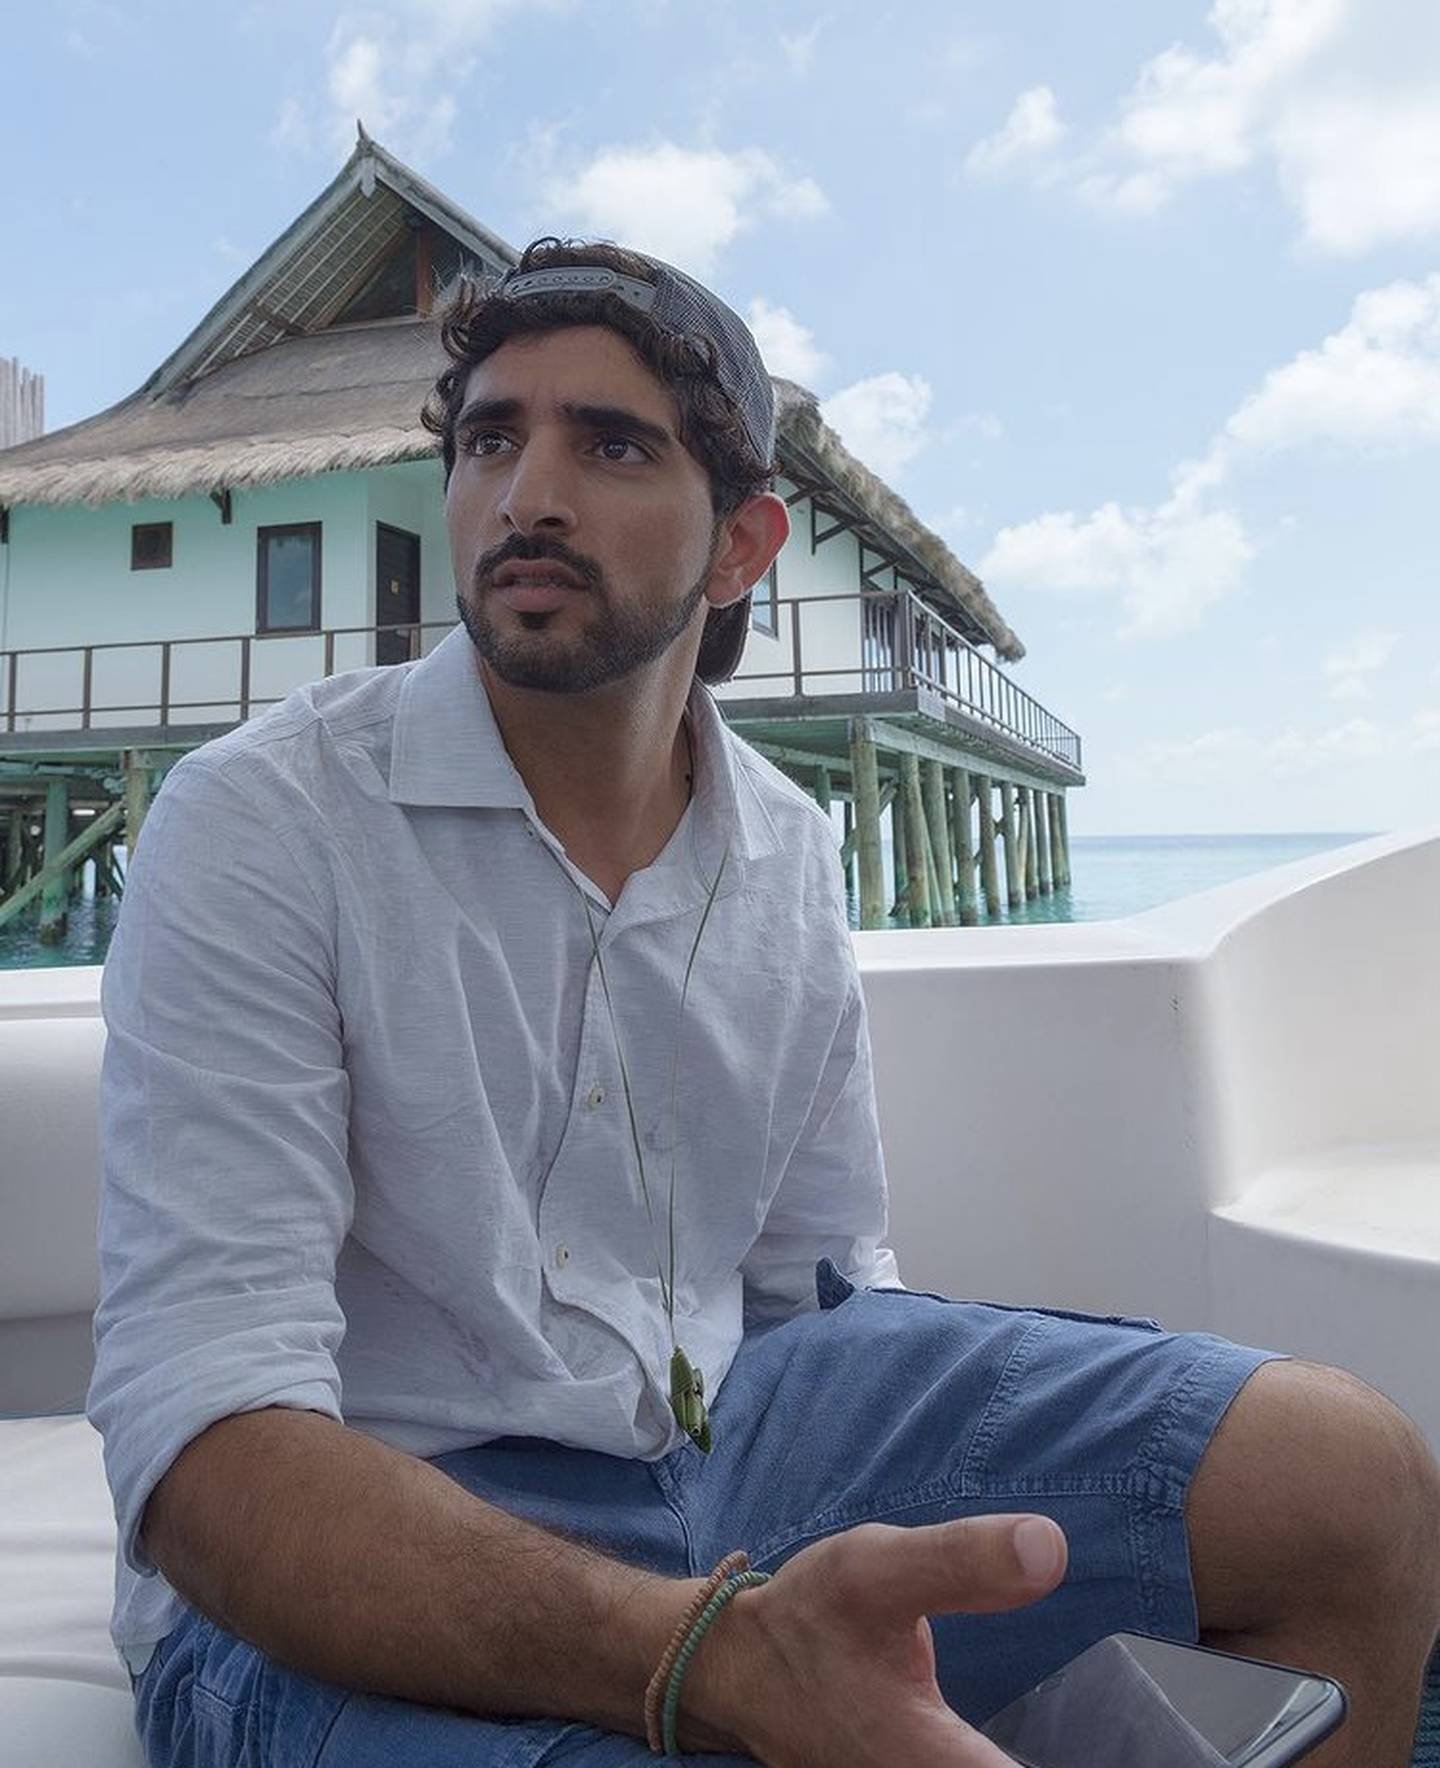 Sheikh Hamdan in the Maldives with the Indian Ocean in the background. Photo: Instagram / @faz3